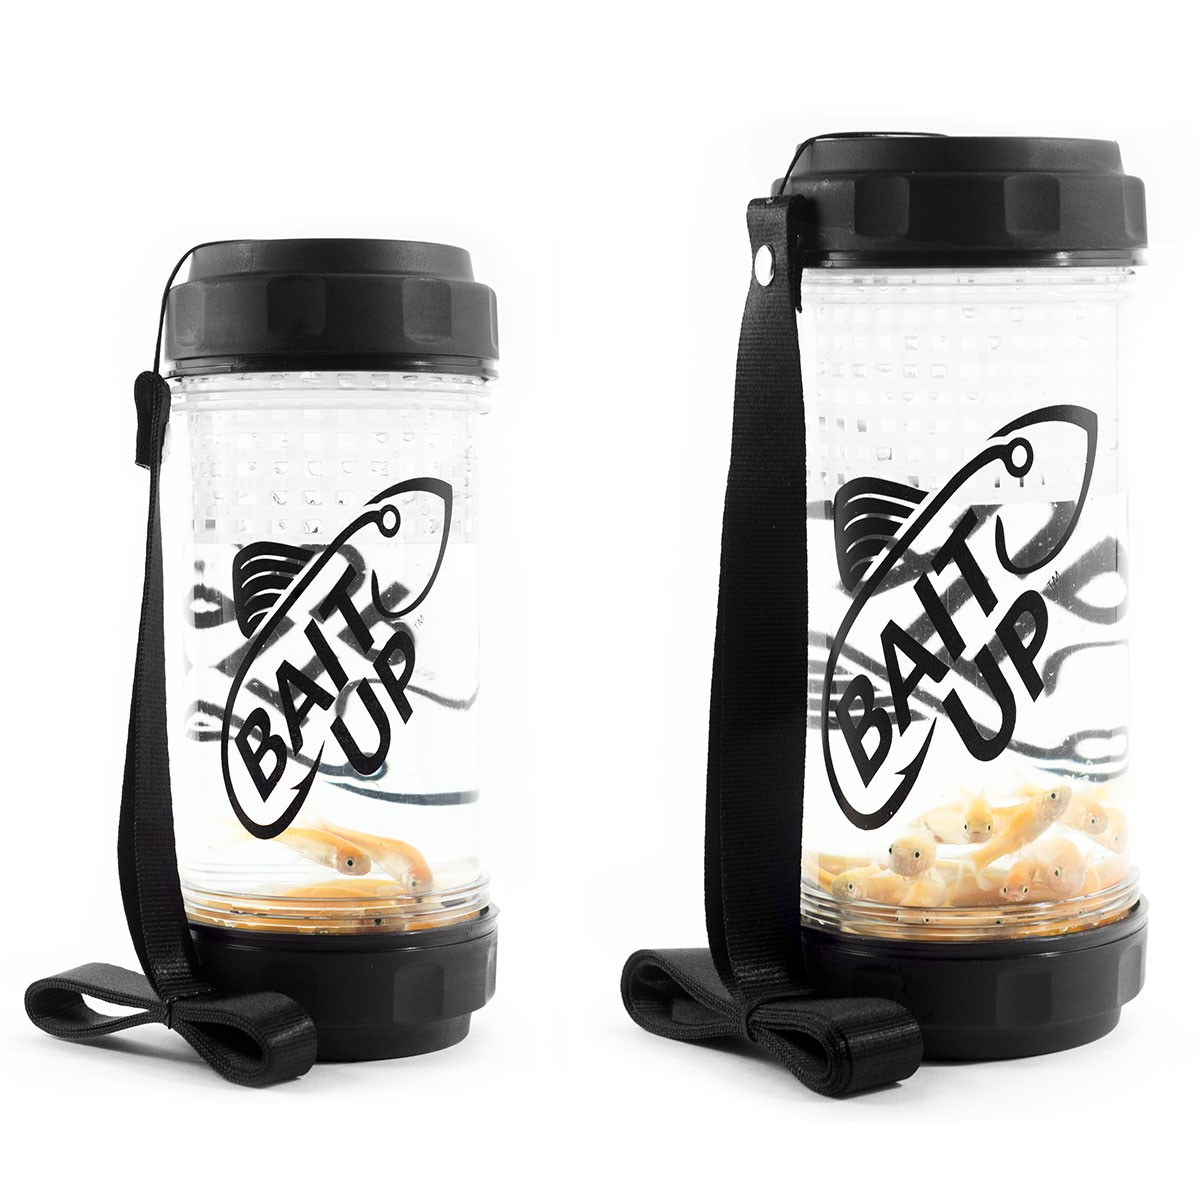 Bait Up Jars - Marine General - Bait Containers and Aerators